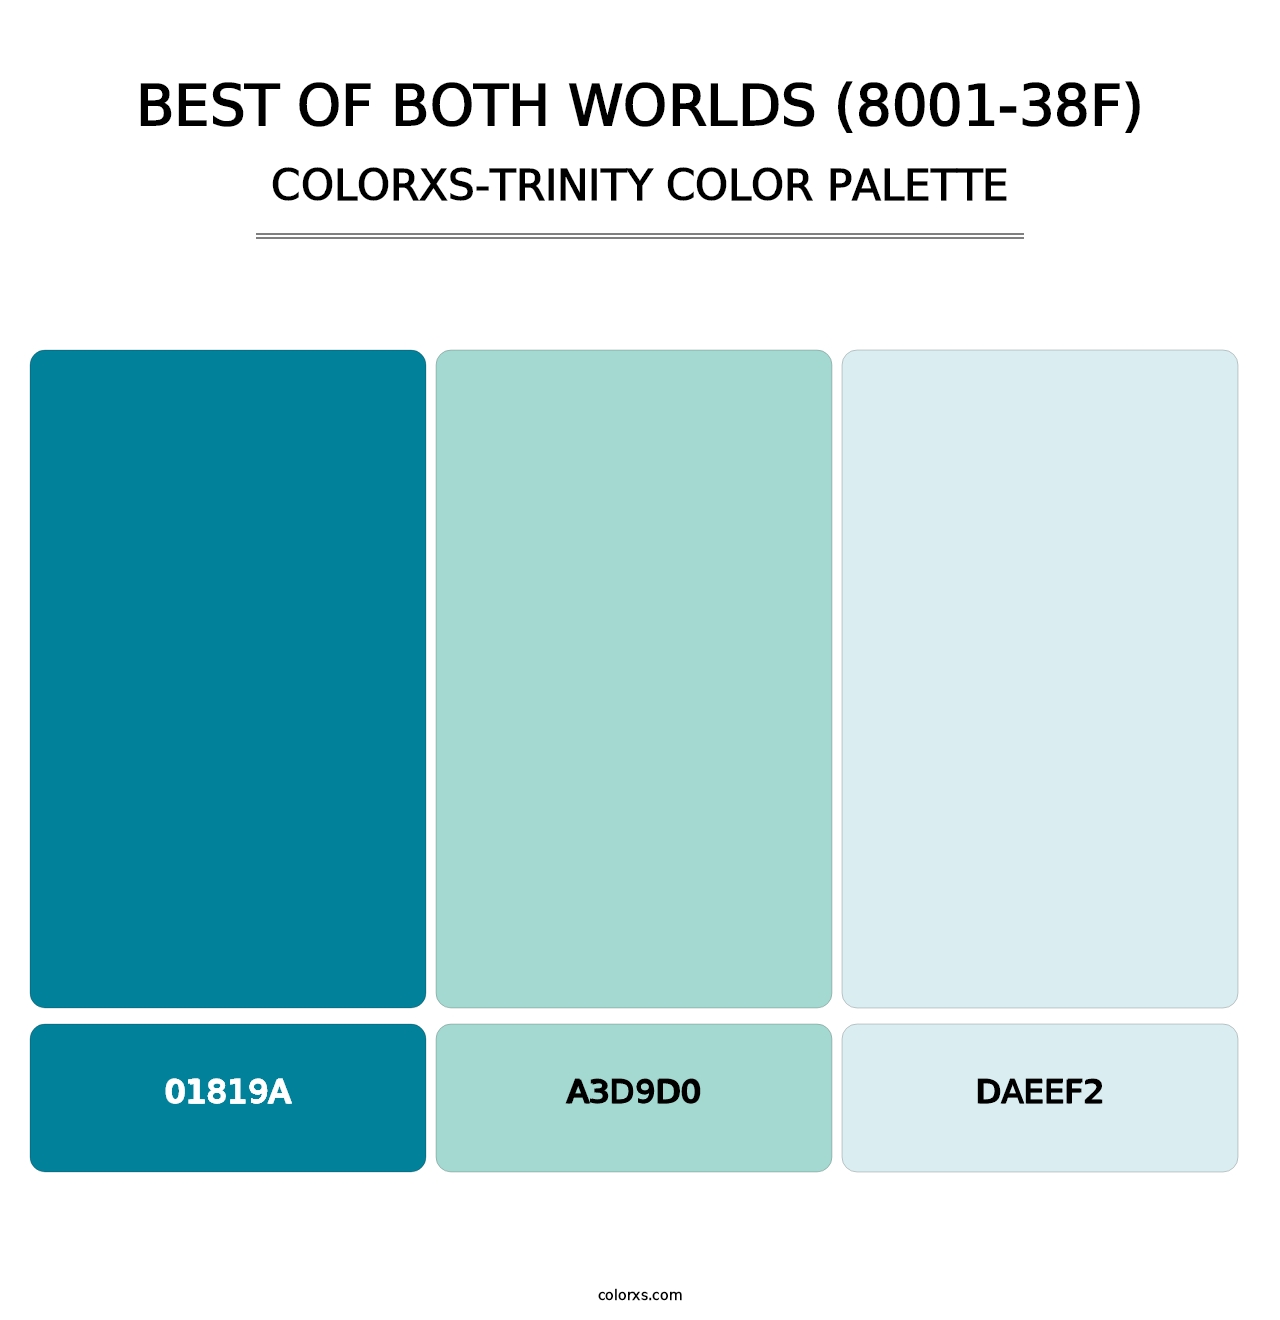 Best of Both Worlds (8001-38F) - Colorxs Trinity Palette